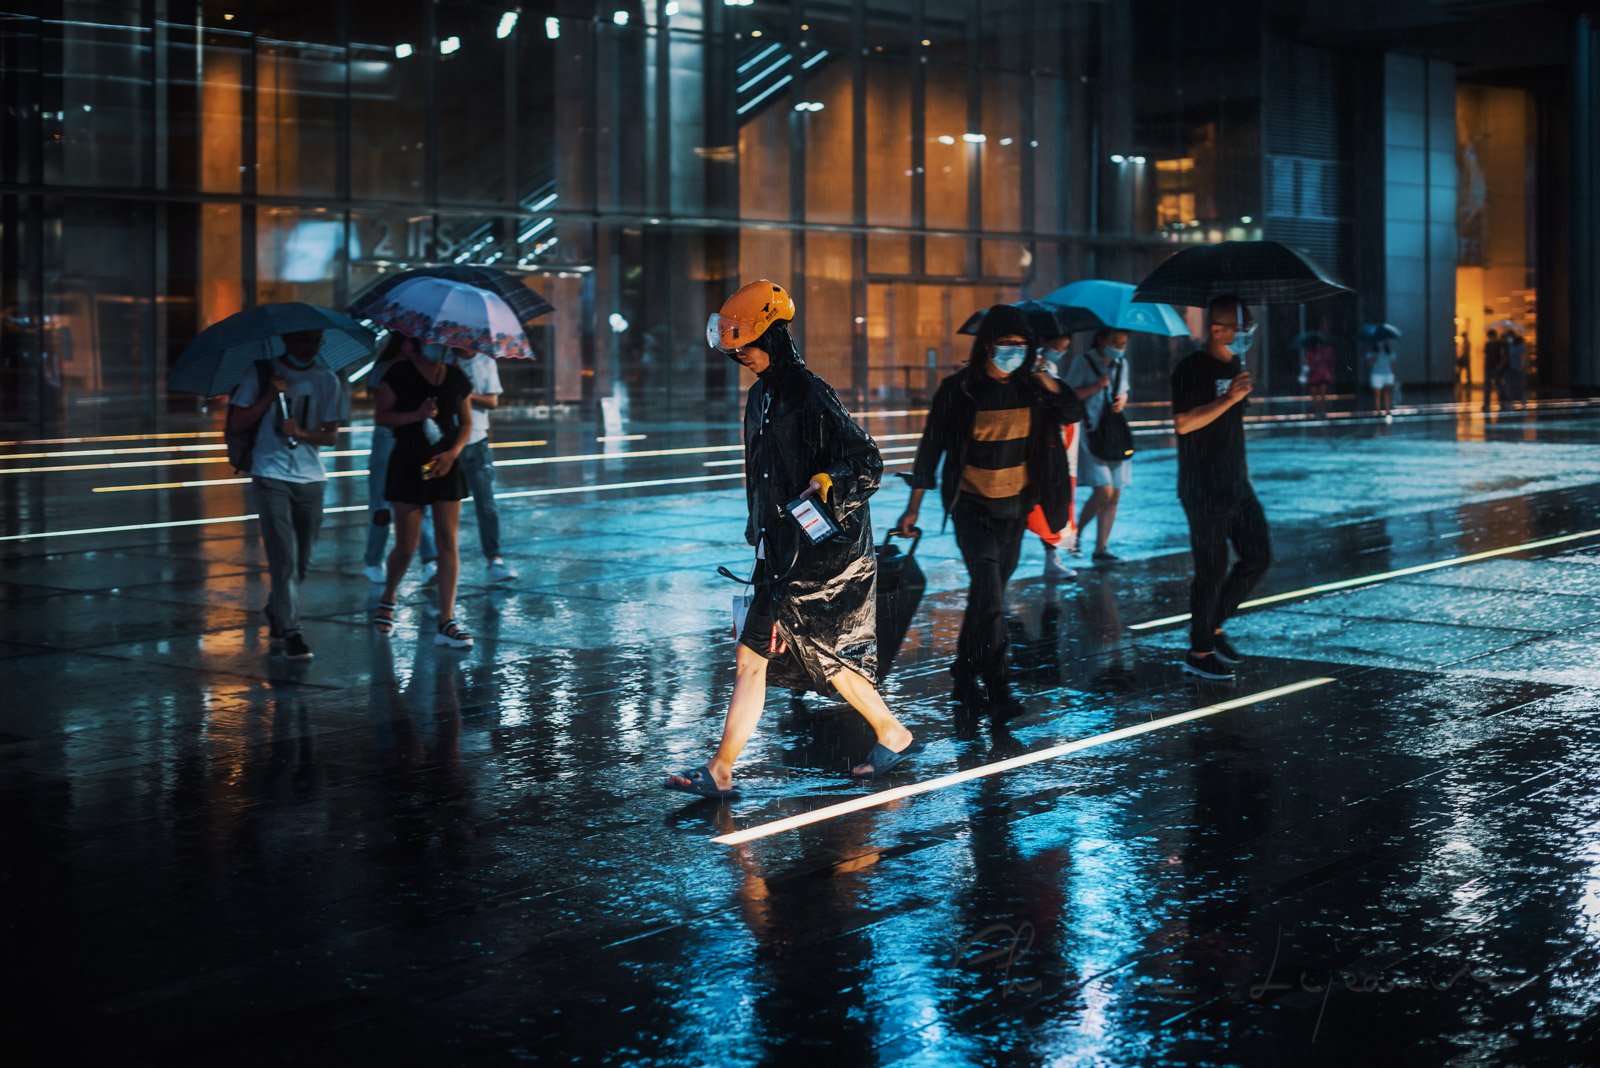 Delivery man rushing in the street under the rain at night near International Finance Square - IFS -, Chengdu, Sichuan province, China